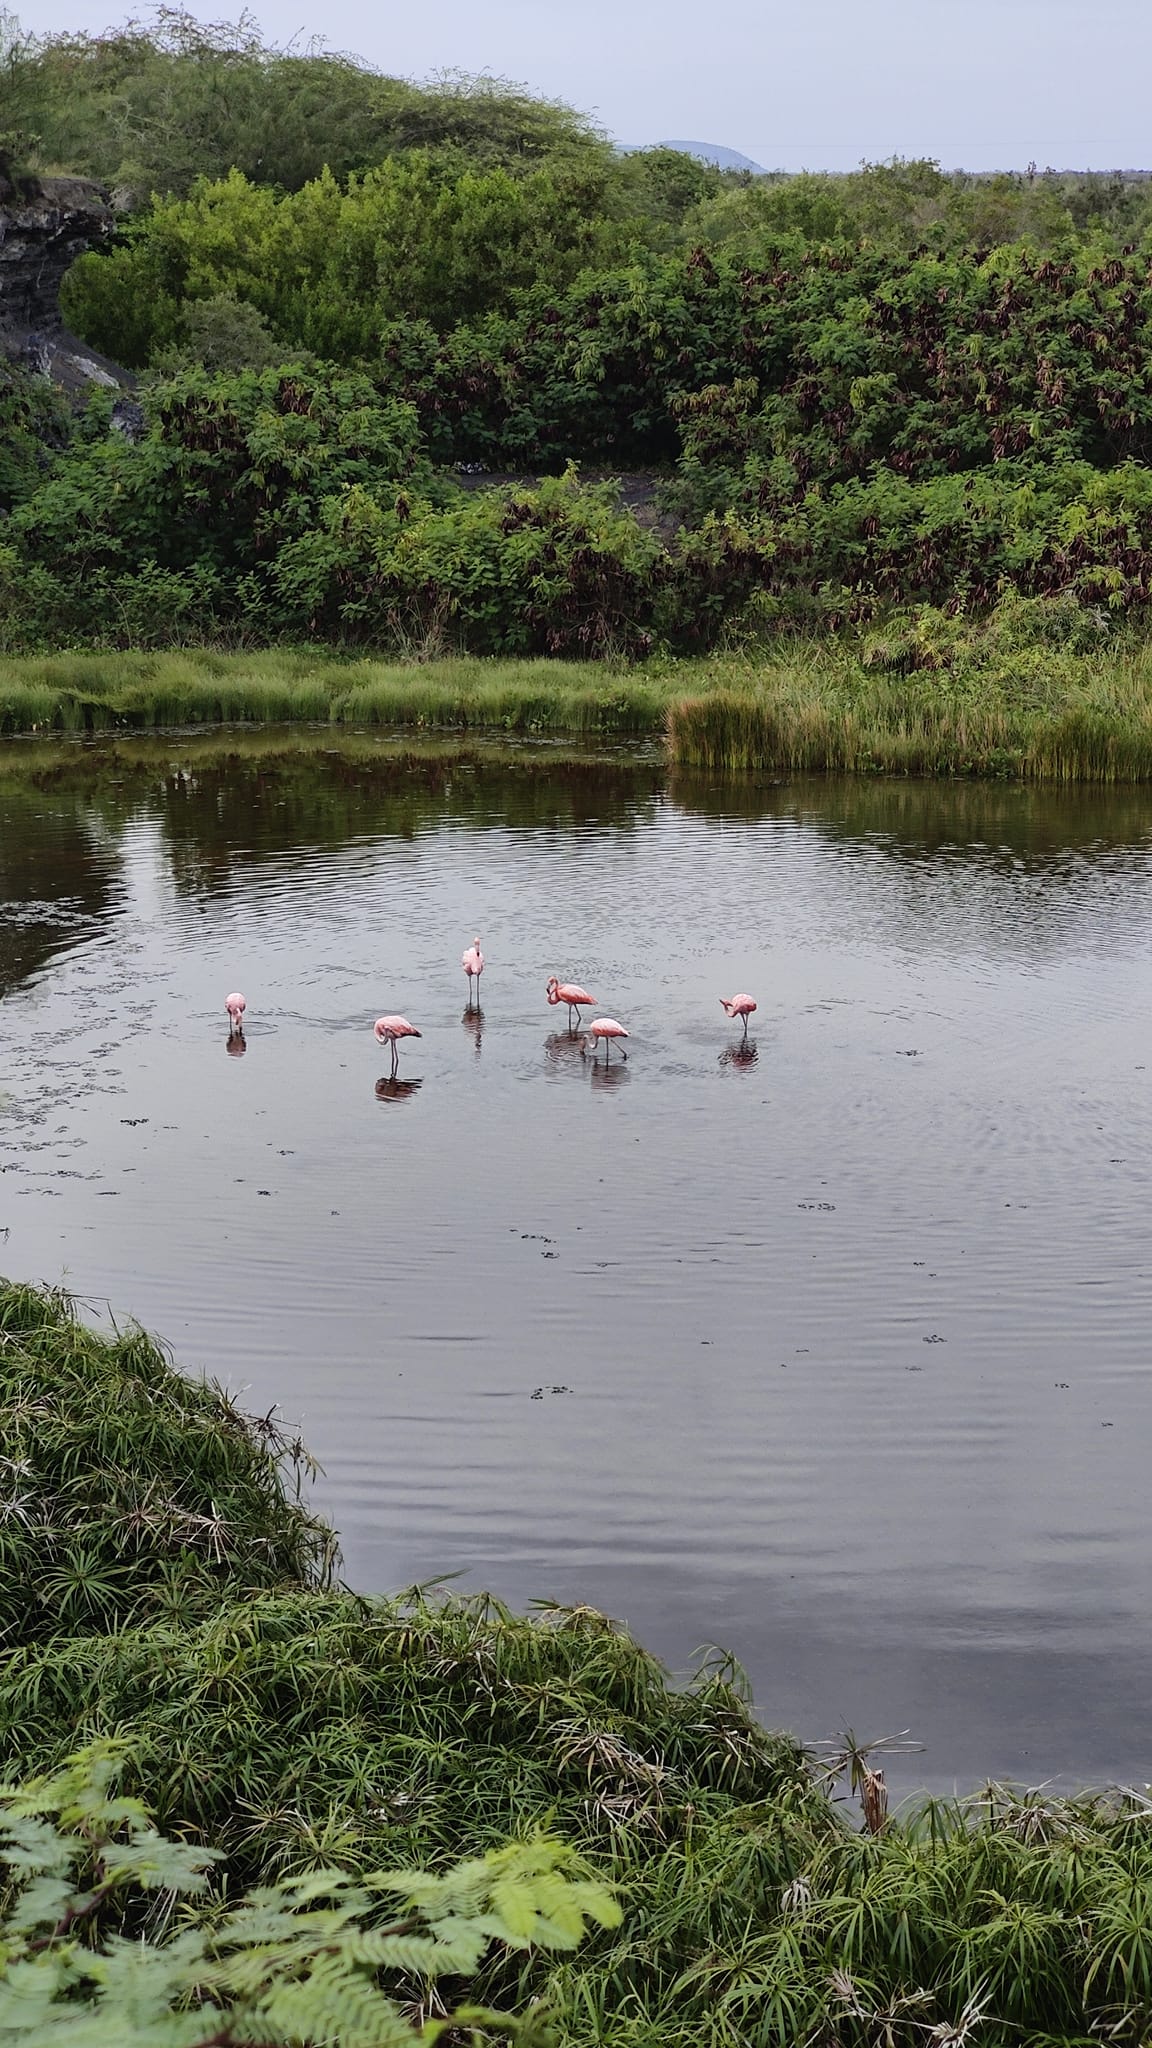 Pictured are 5 flamingos in a pond. They are looking for food and clean themselves. Surrounding the pond is a lot of greenery and trees.